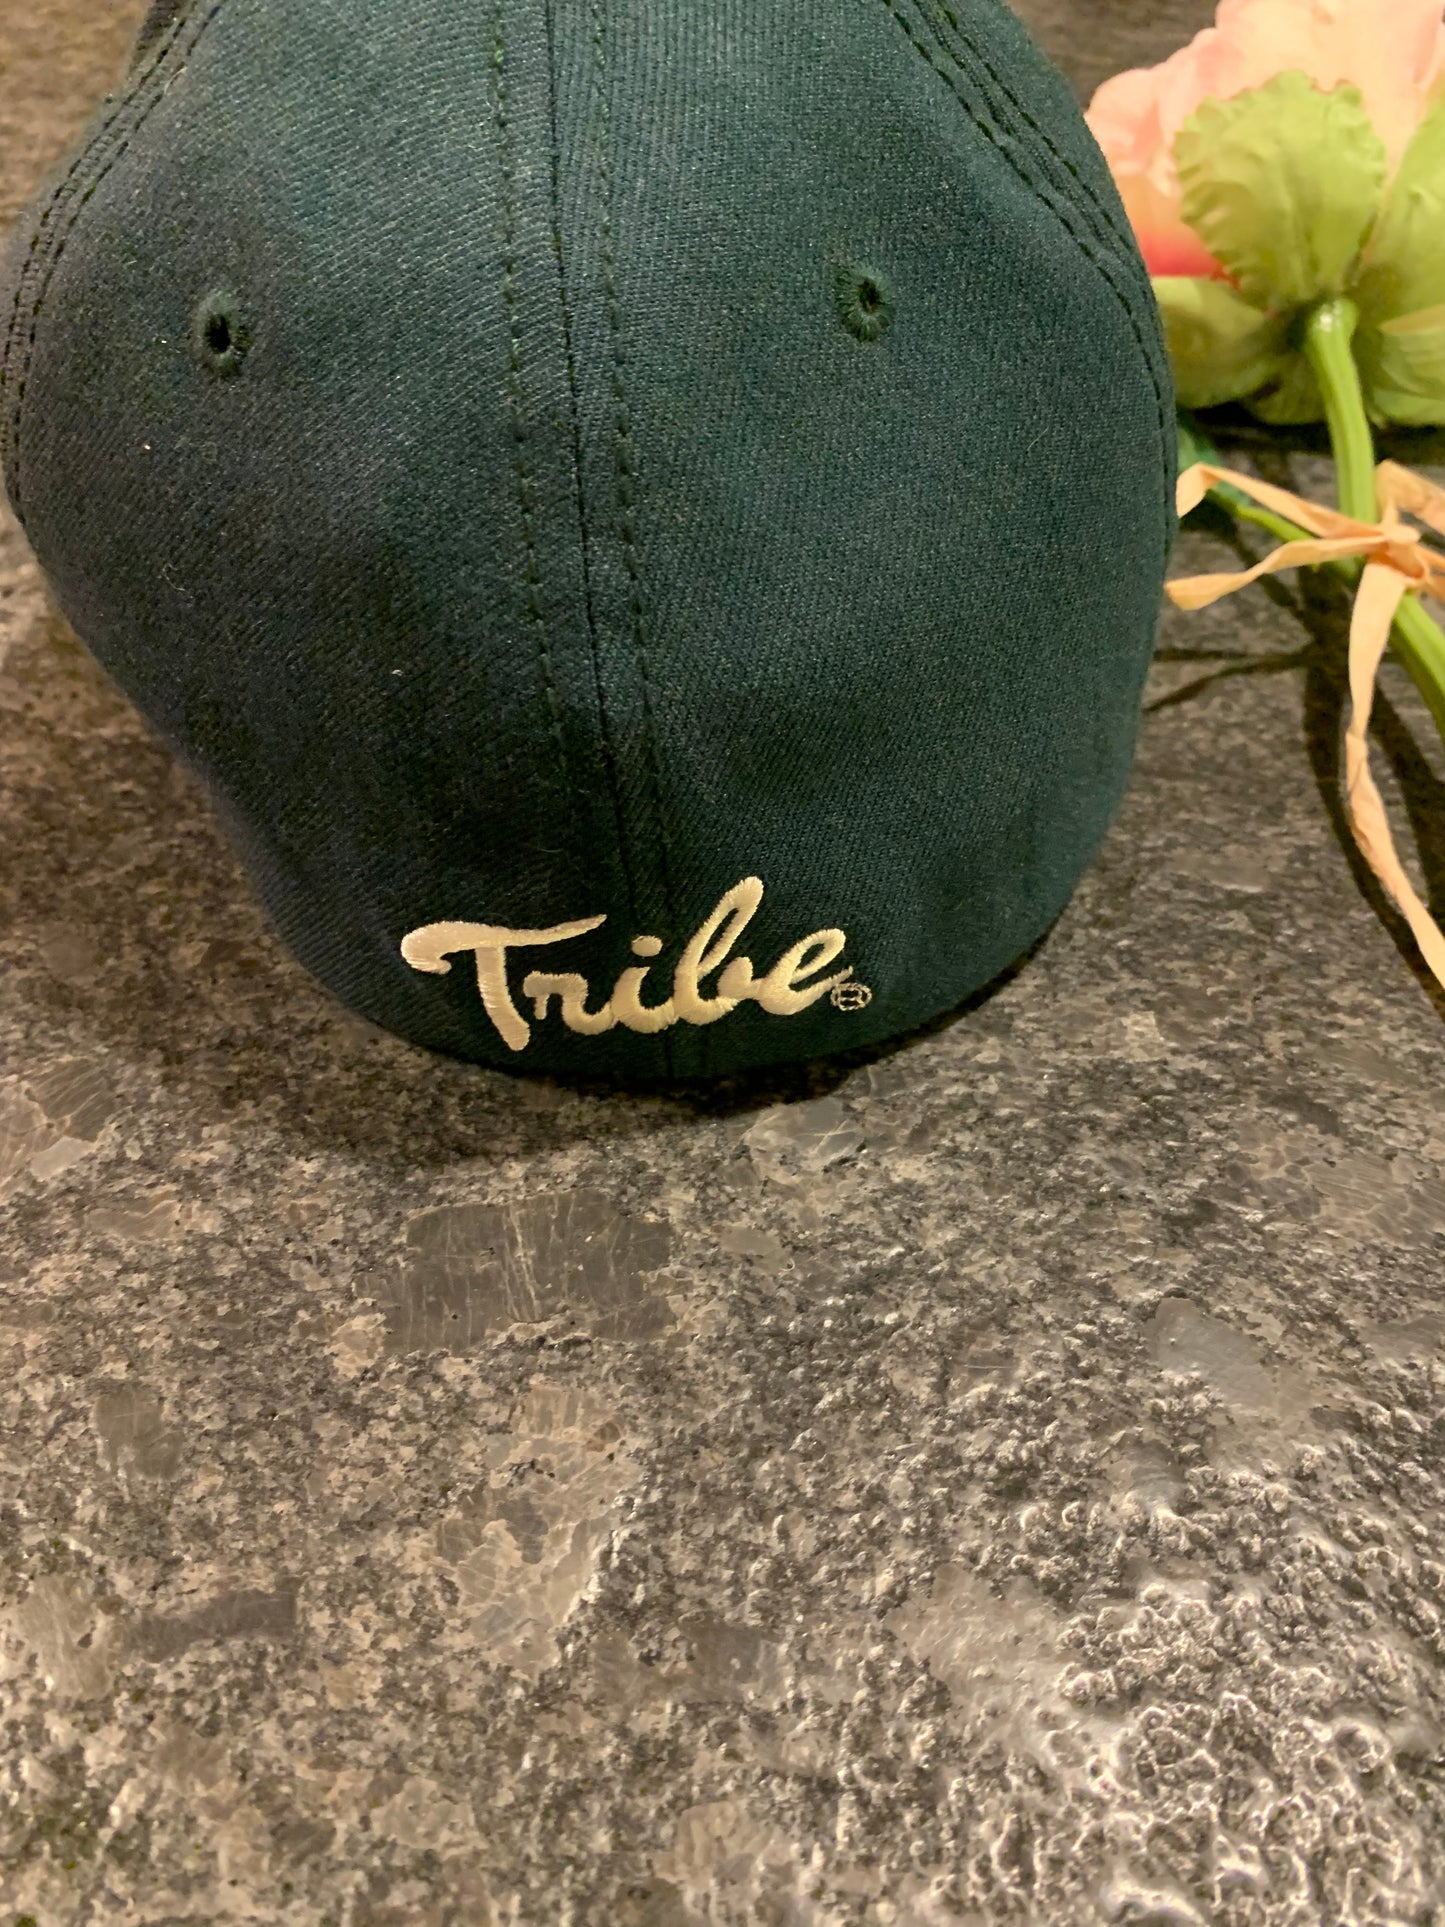 The College of W&M Tribe Baseball Cap